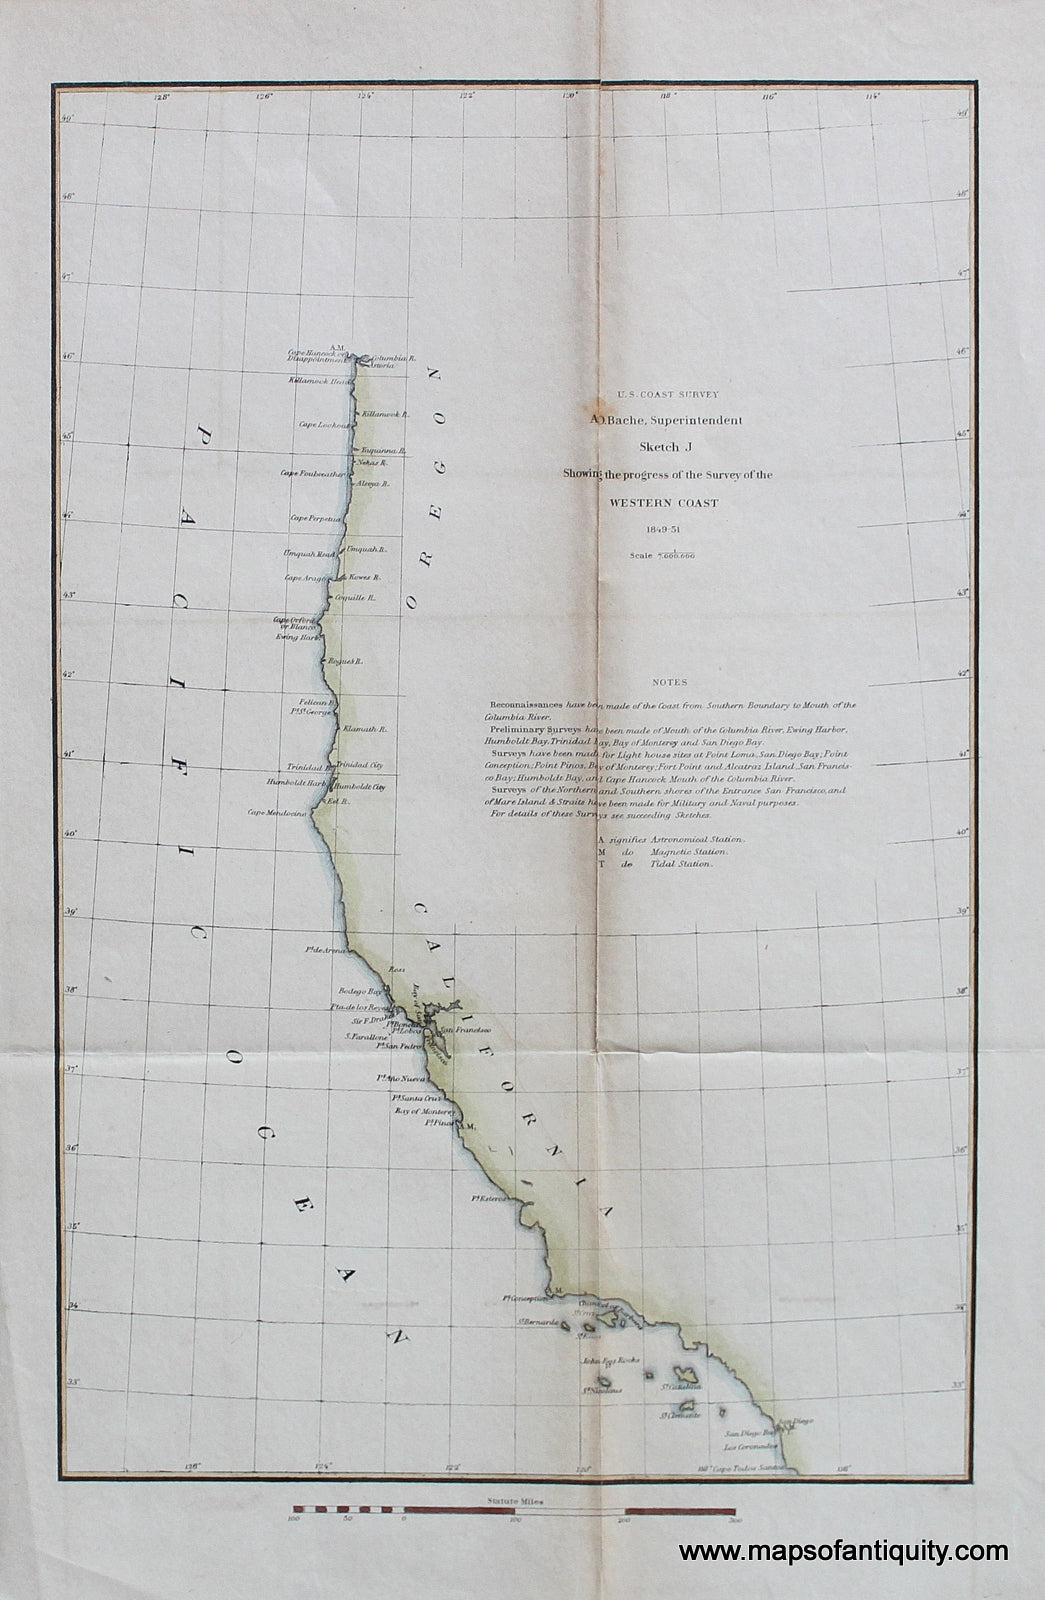 Hand-Colored-Antique-Coastal-Chart-Sketch-J-Showing-the-progress-of-the-Survey-of-the-Western-Coast**********-United-States-West-1851-U.S.-Coast-Survey-Maps-Of-Antiquity